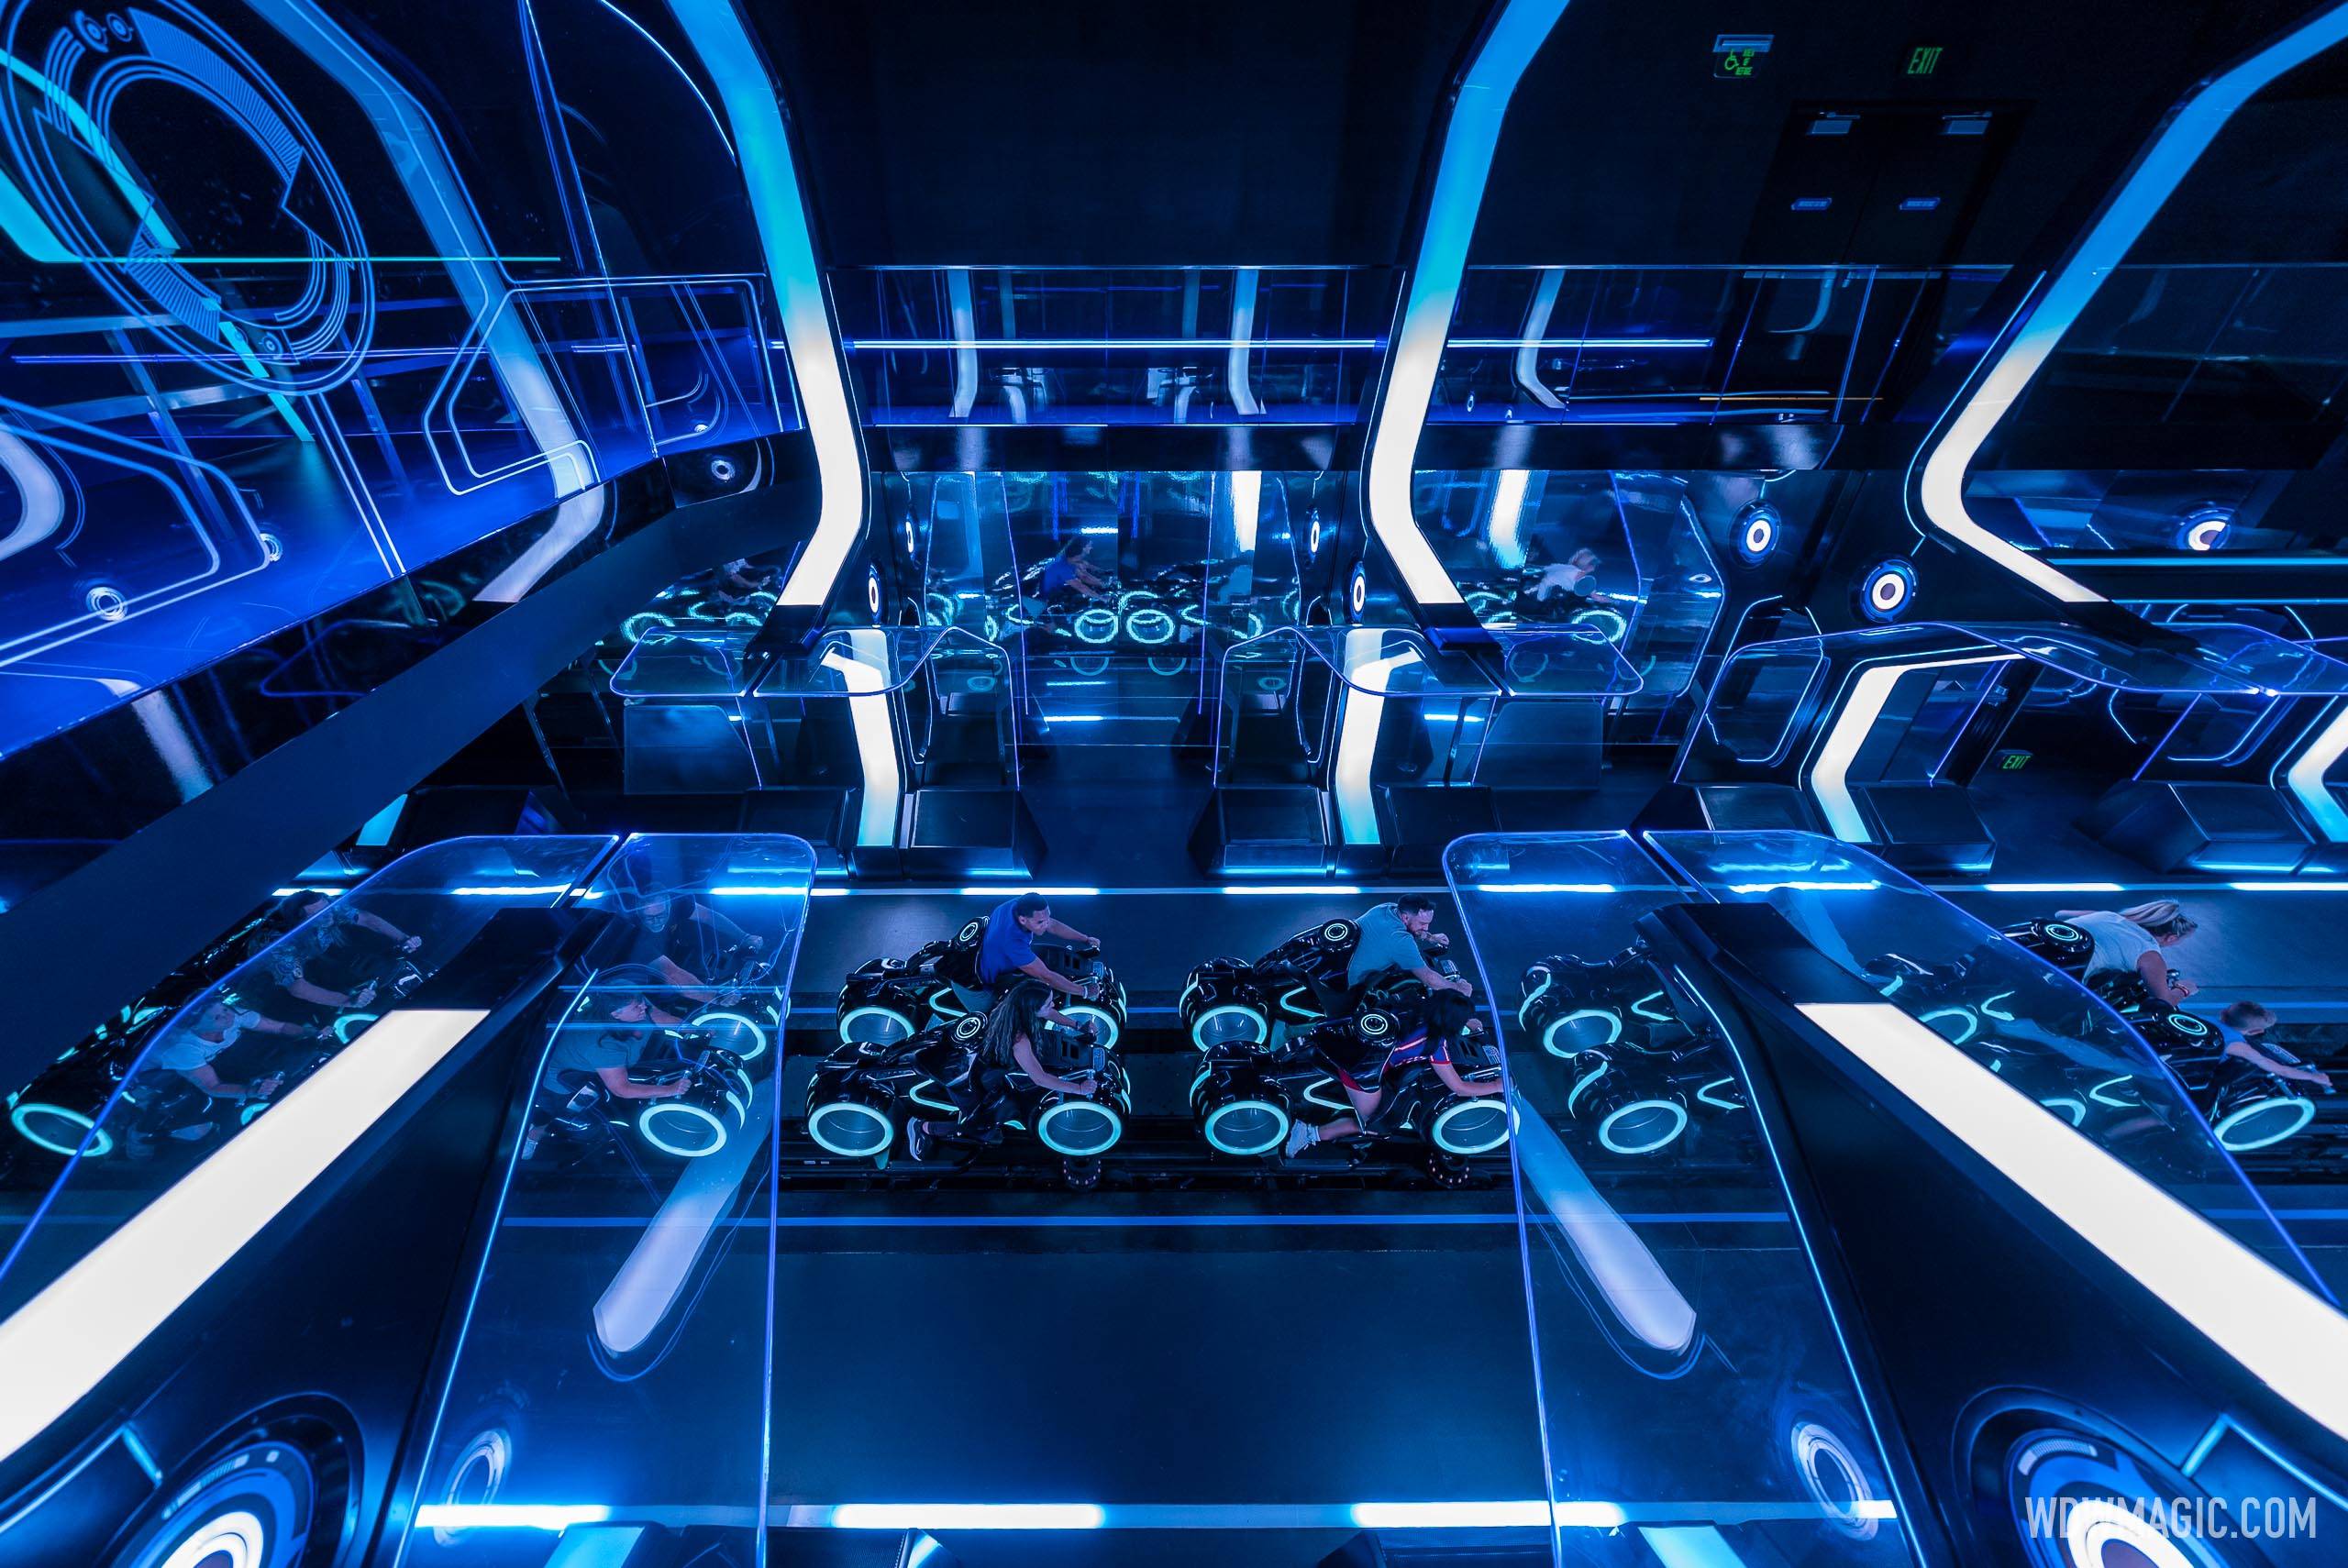 TRON will be available during Extended Evening Theme Park hours